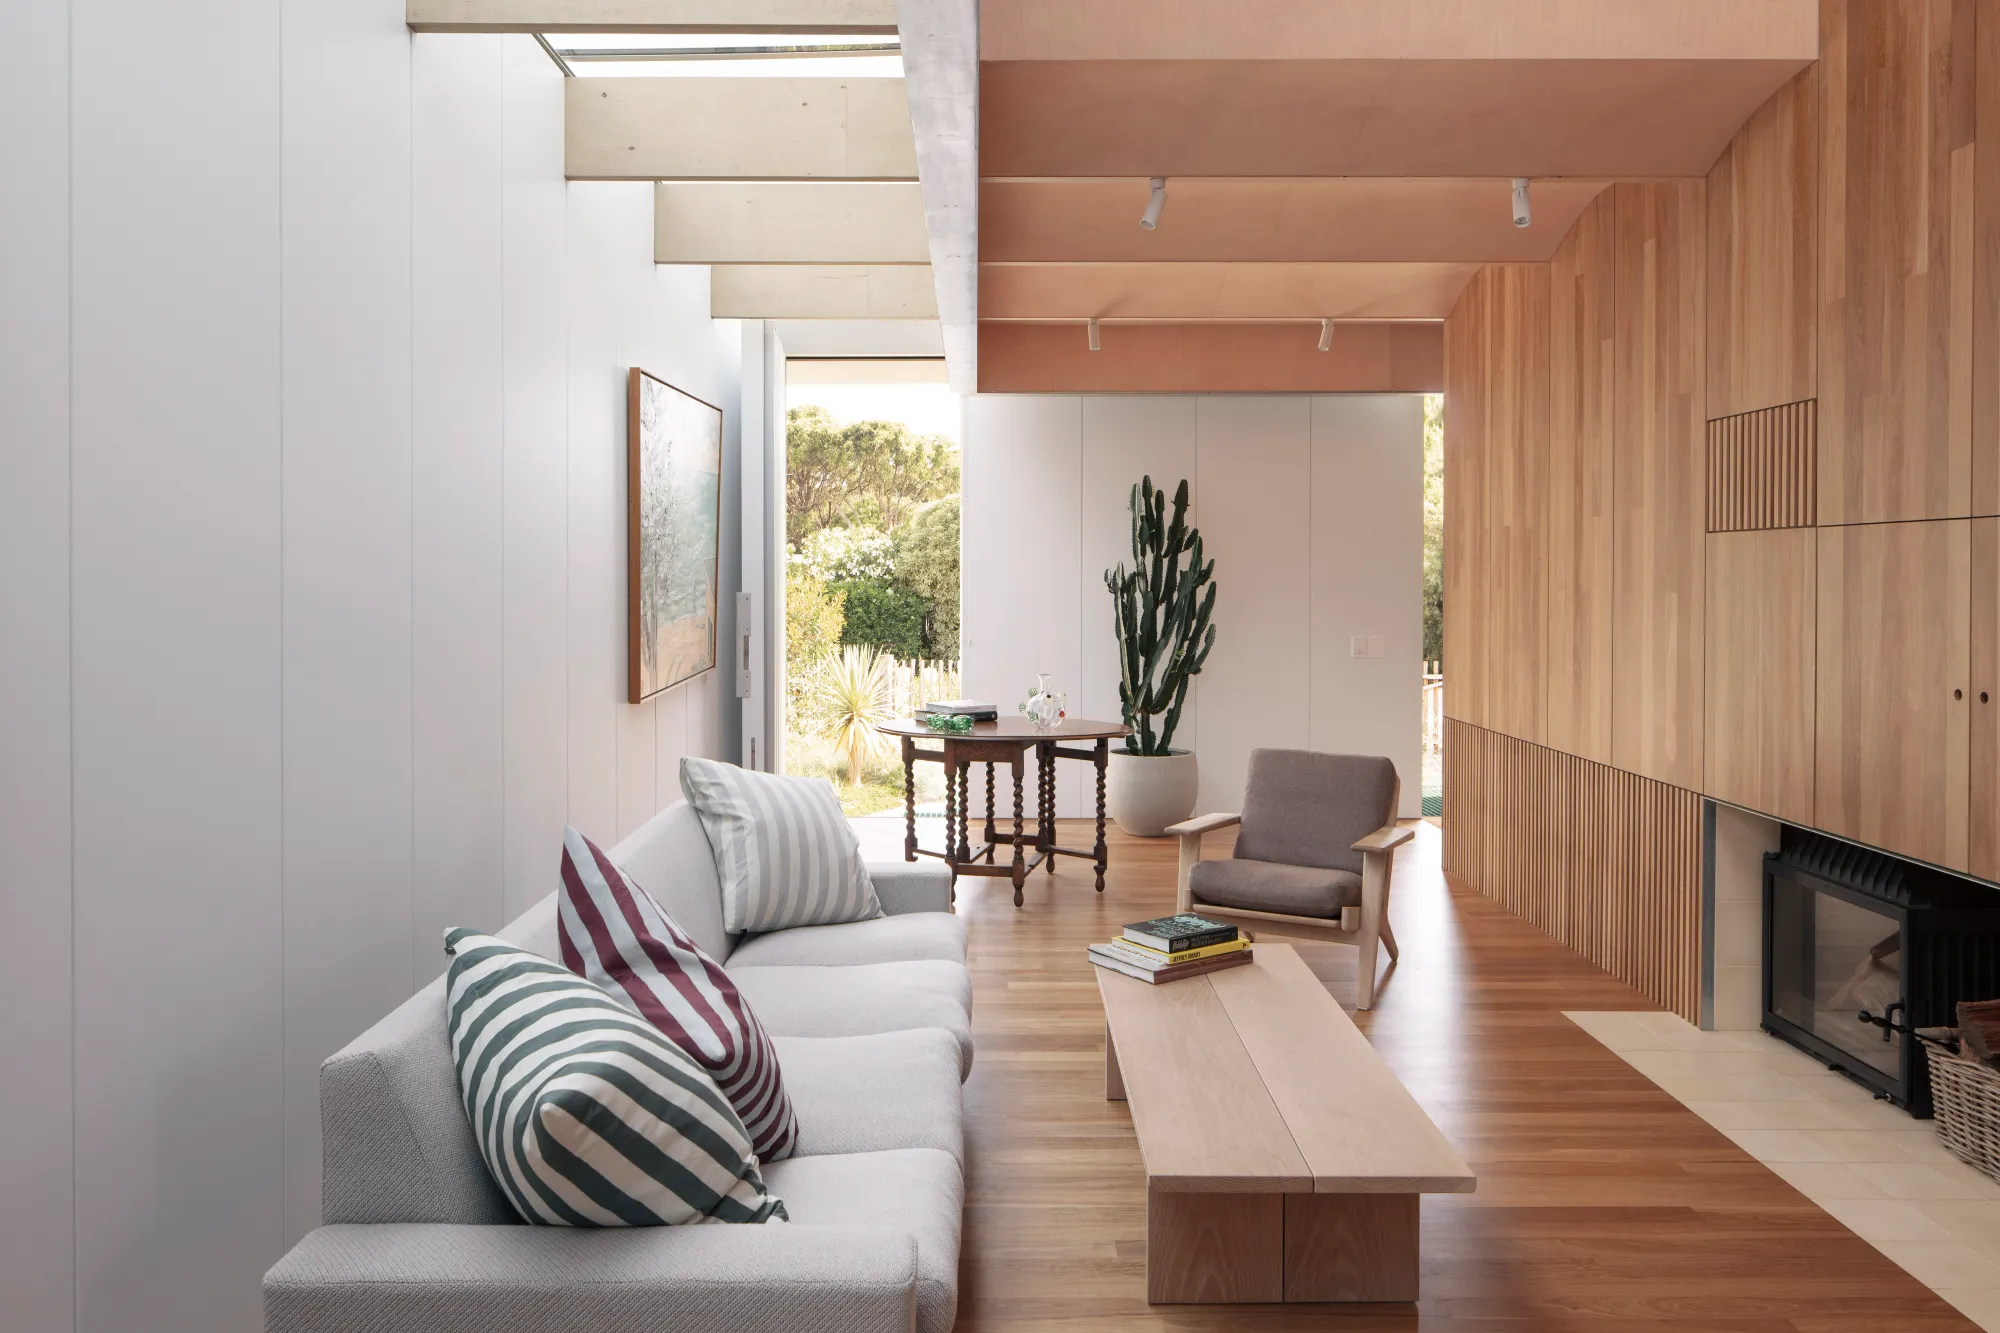 AB House by Office MI—JI. Photography by Ben Hosking